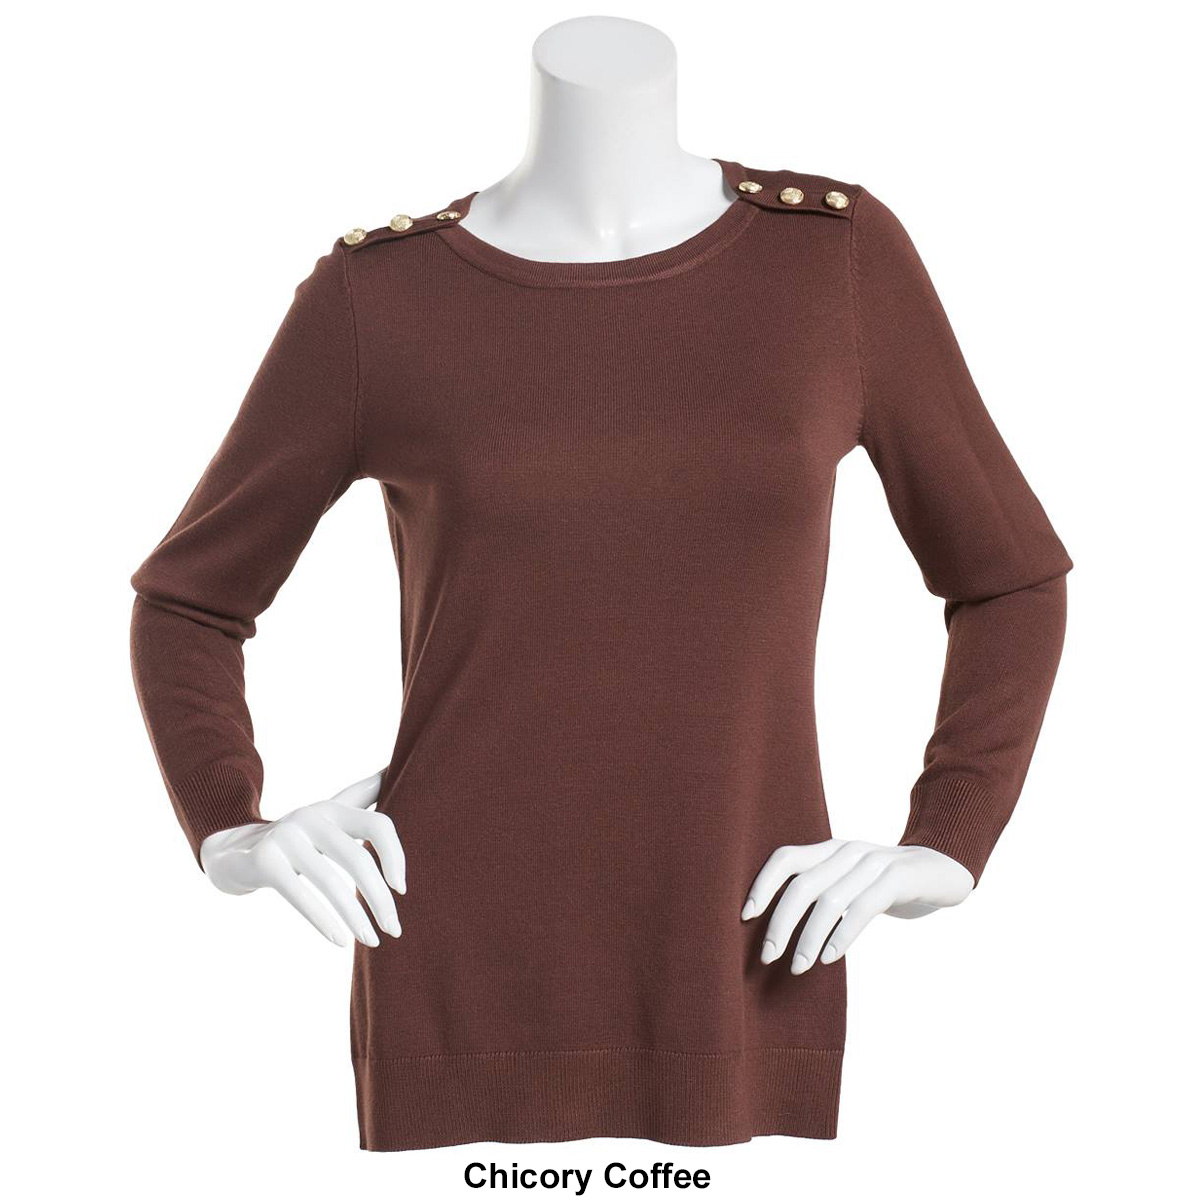 Womens By Design Long Sleeve Solid Sweater With Gold Button Trim